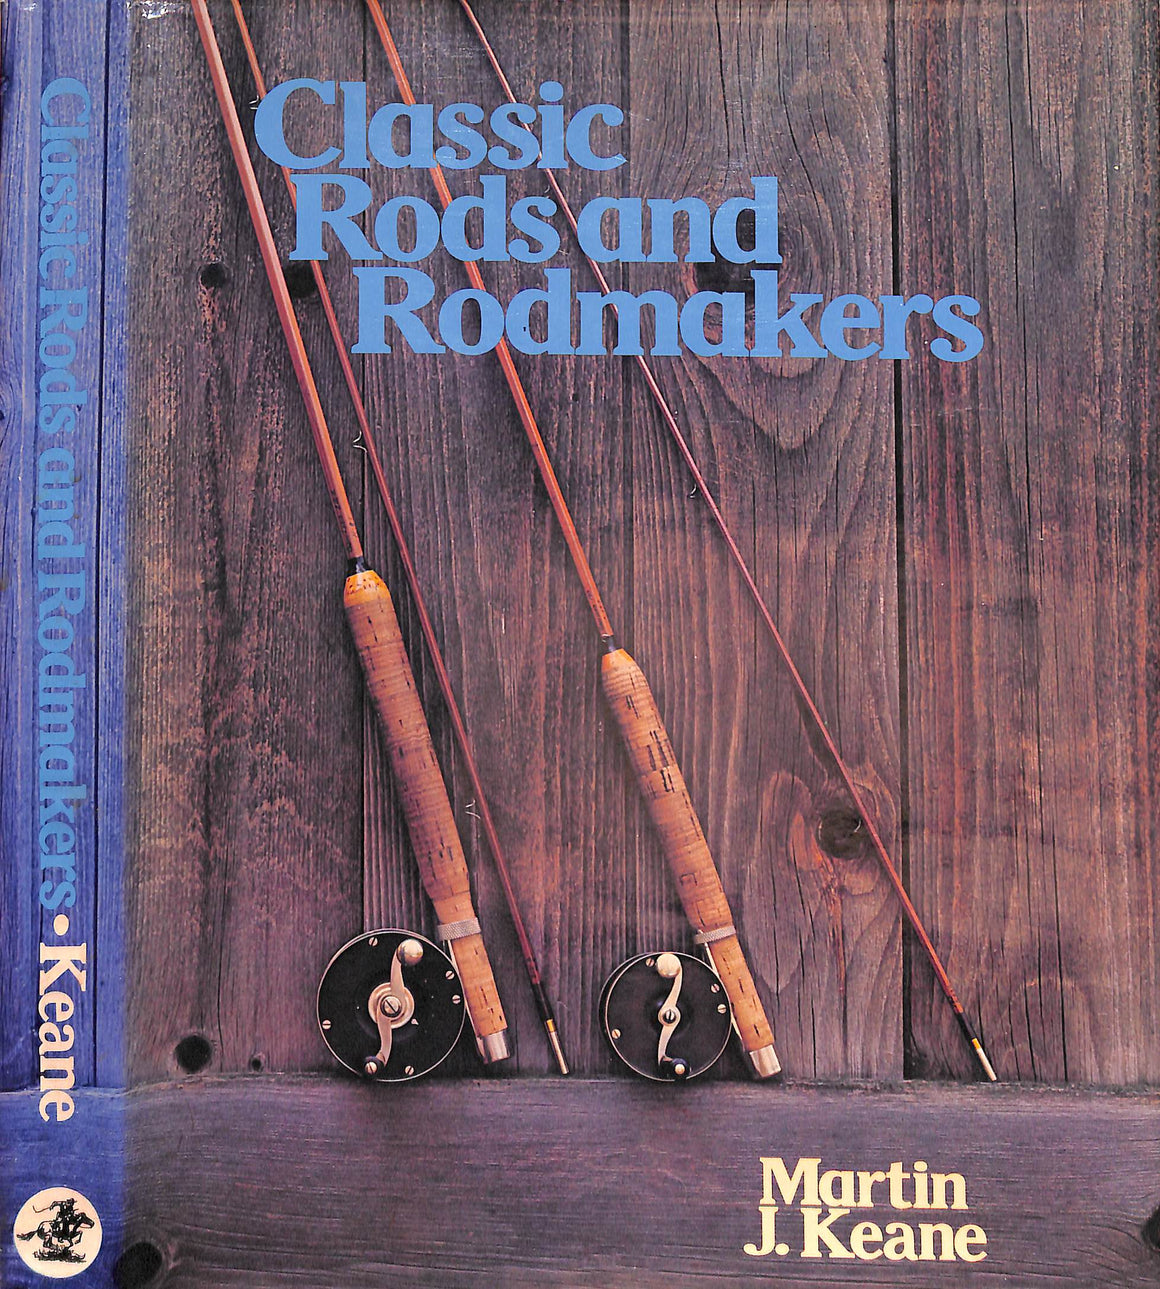 "Classic Rods And Rodmakers" 1976 KEANE, Martin J.